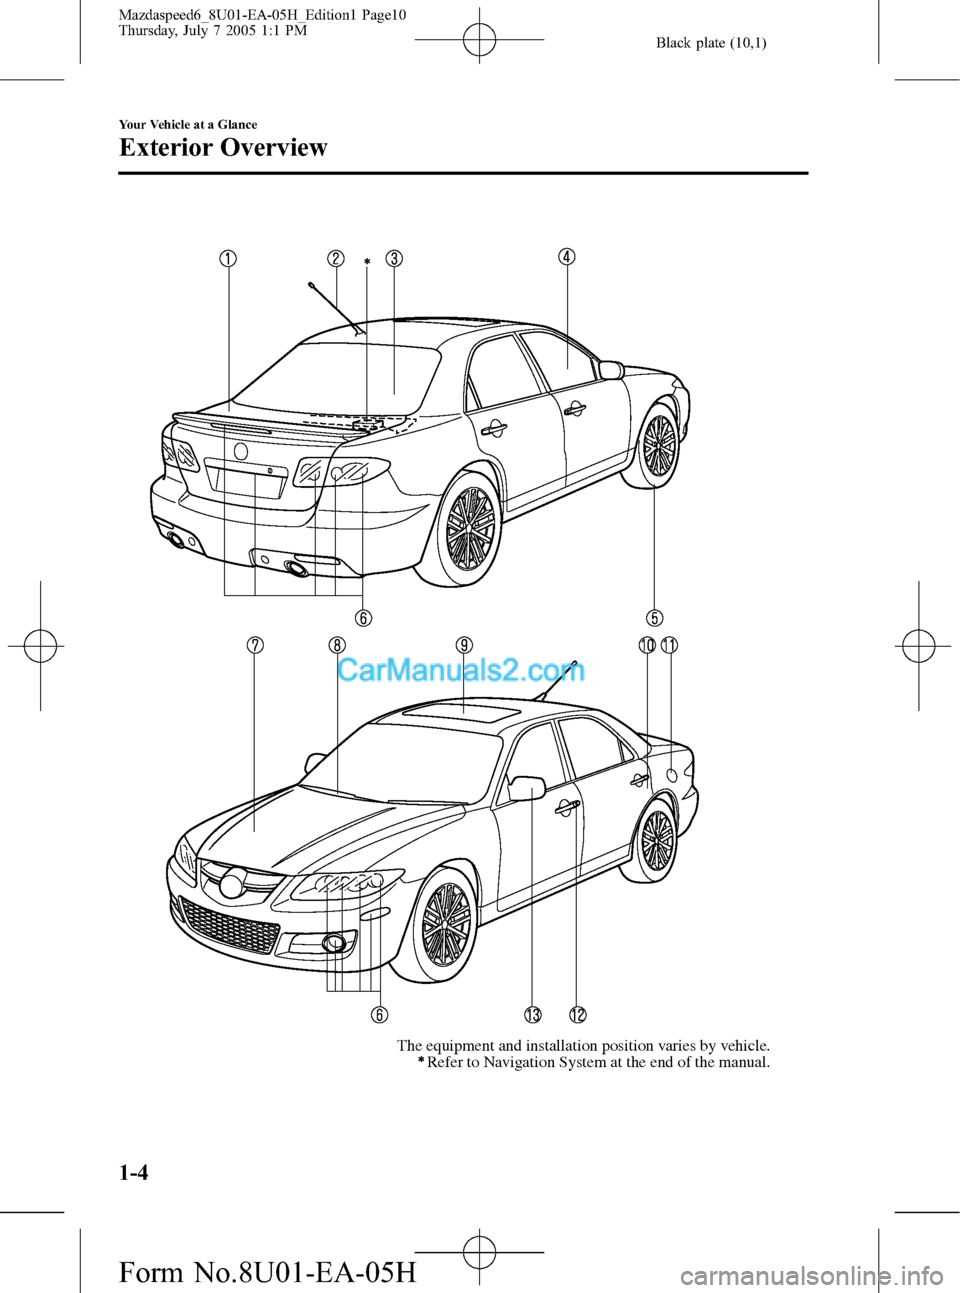 MAZDA MODEL MAZDASPEED 6 2006  Owners Manual (in English) Black plate (10,1)
The equipment and installation position varies by vehicle.
Refer to Navigation System at the end of the manual.
1-4
Your Vehicle at a Glance
Exterior Overview
Mazdaspeed6_8U01-EA-05